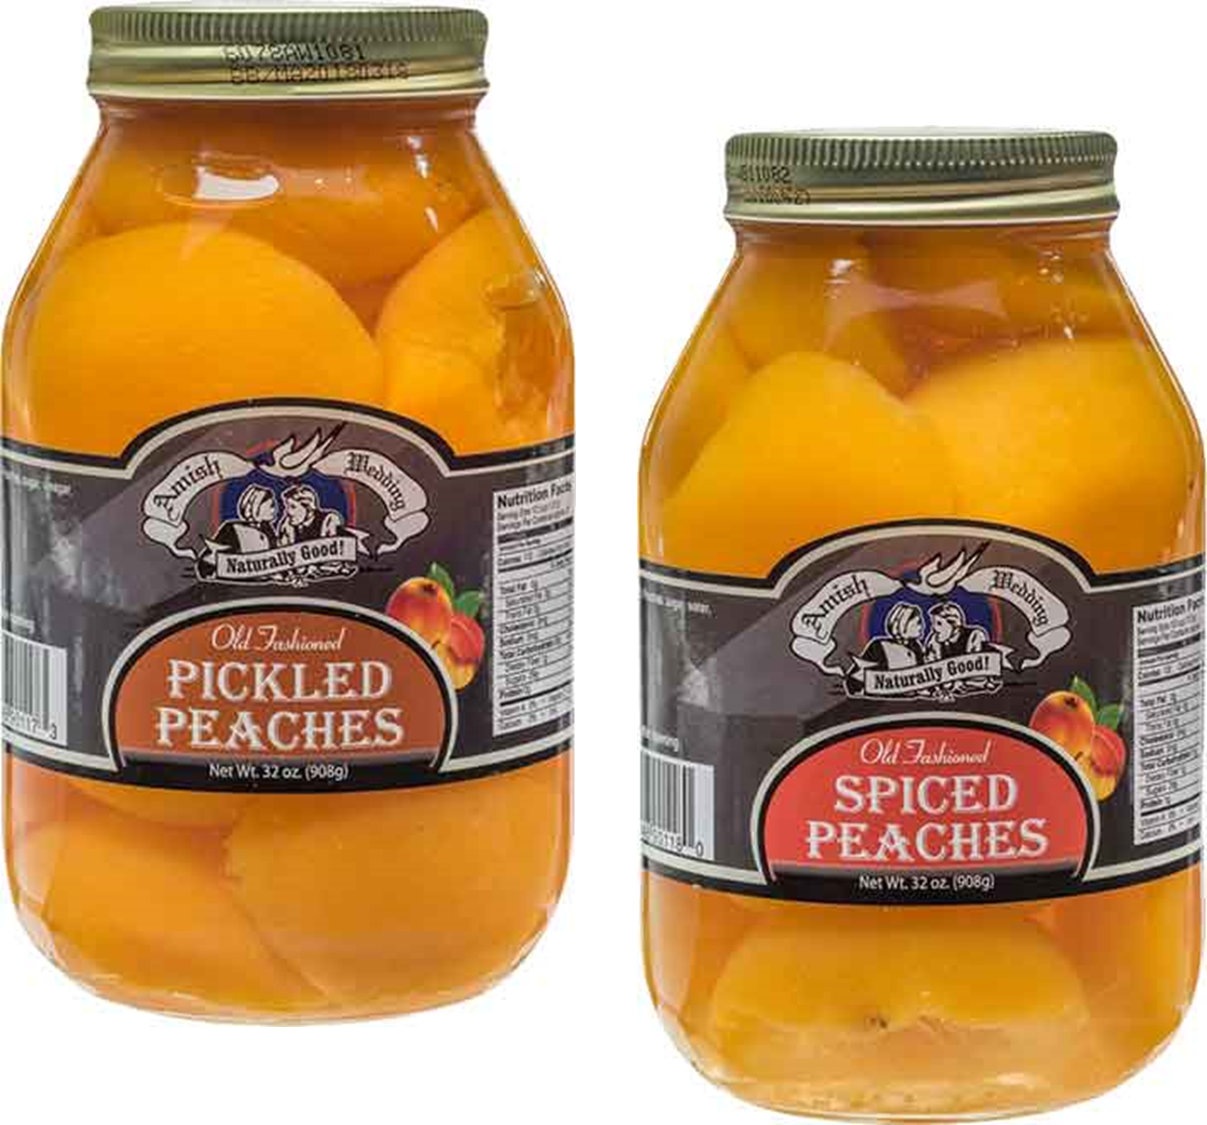 Primary image for Amish Wedding Pickled Peach Halves and Spiced Peach Halves Variety 2-Pack